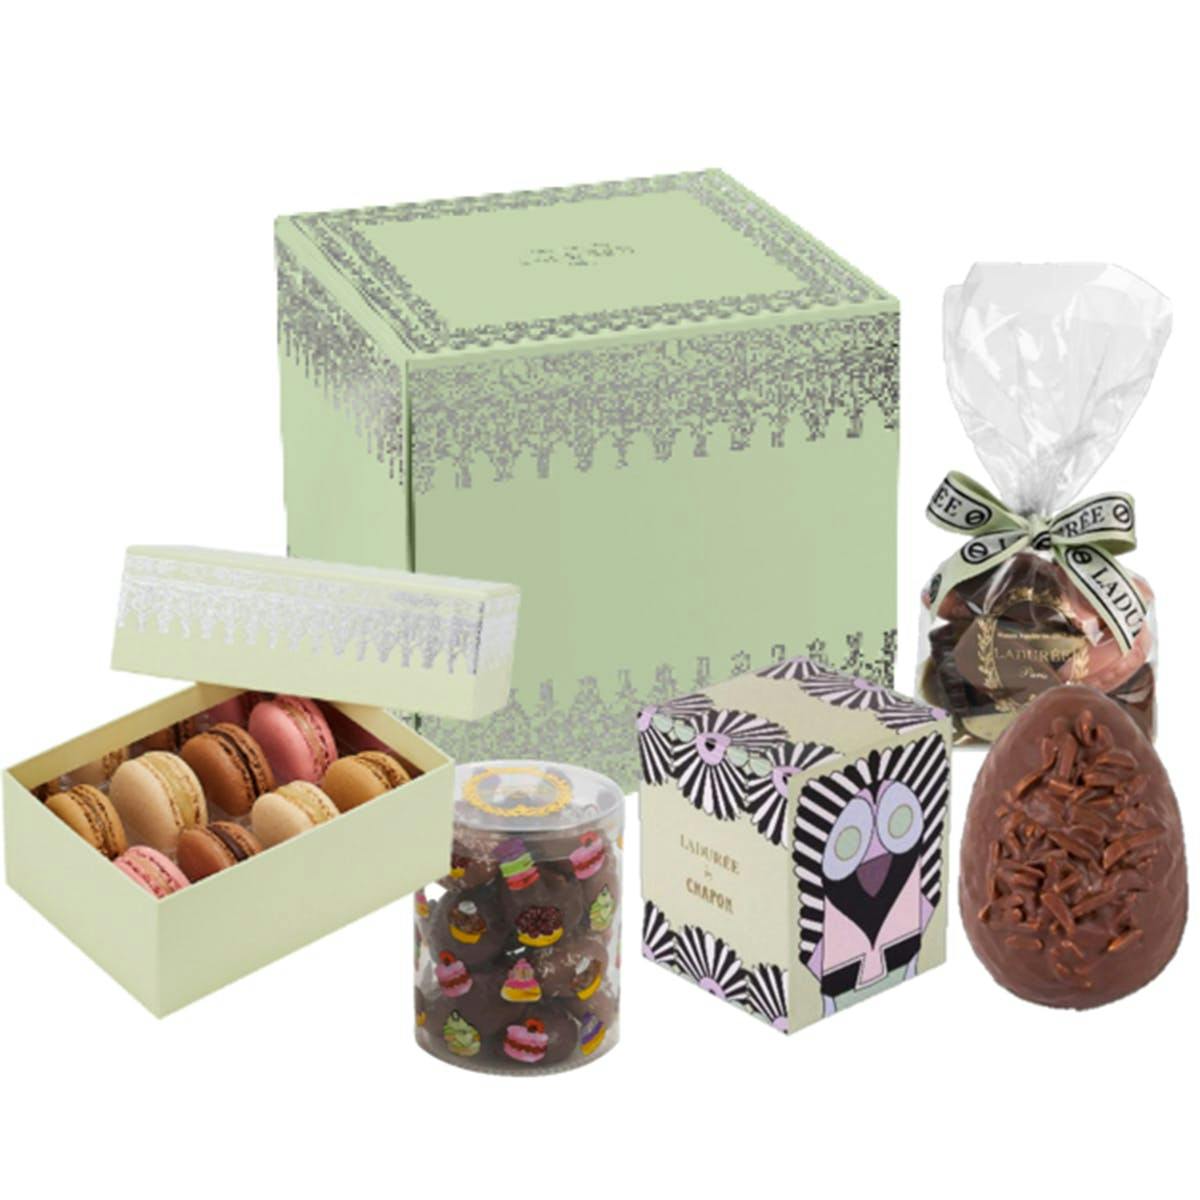 Gifts for 13 Year Old Girls Gift Box Set - Dear Ava